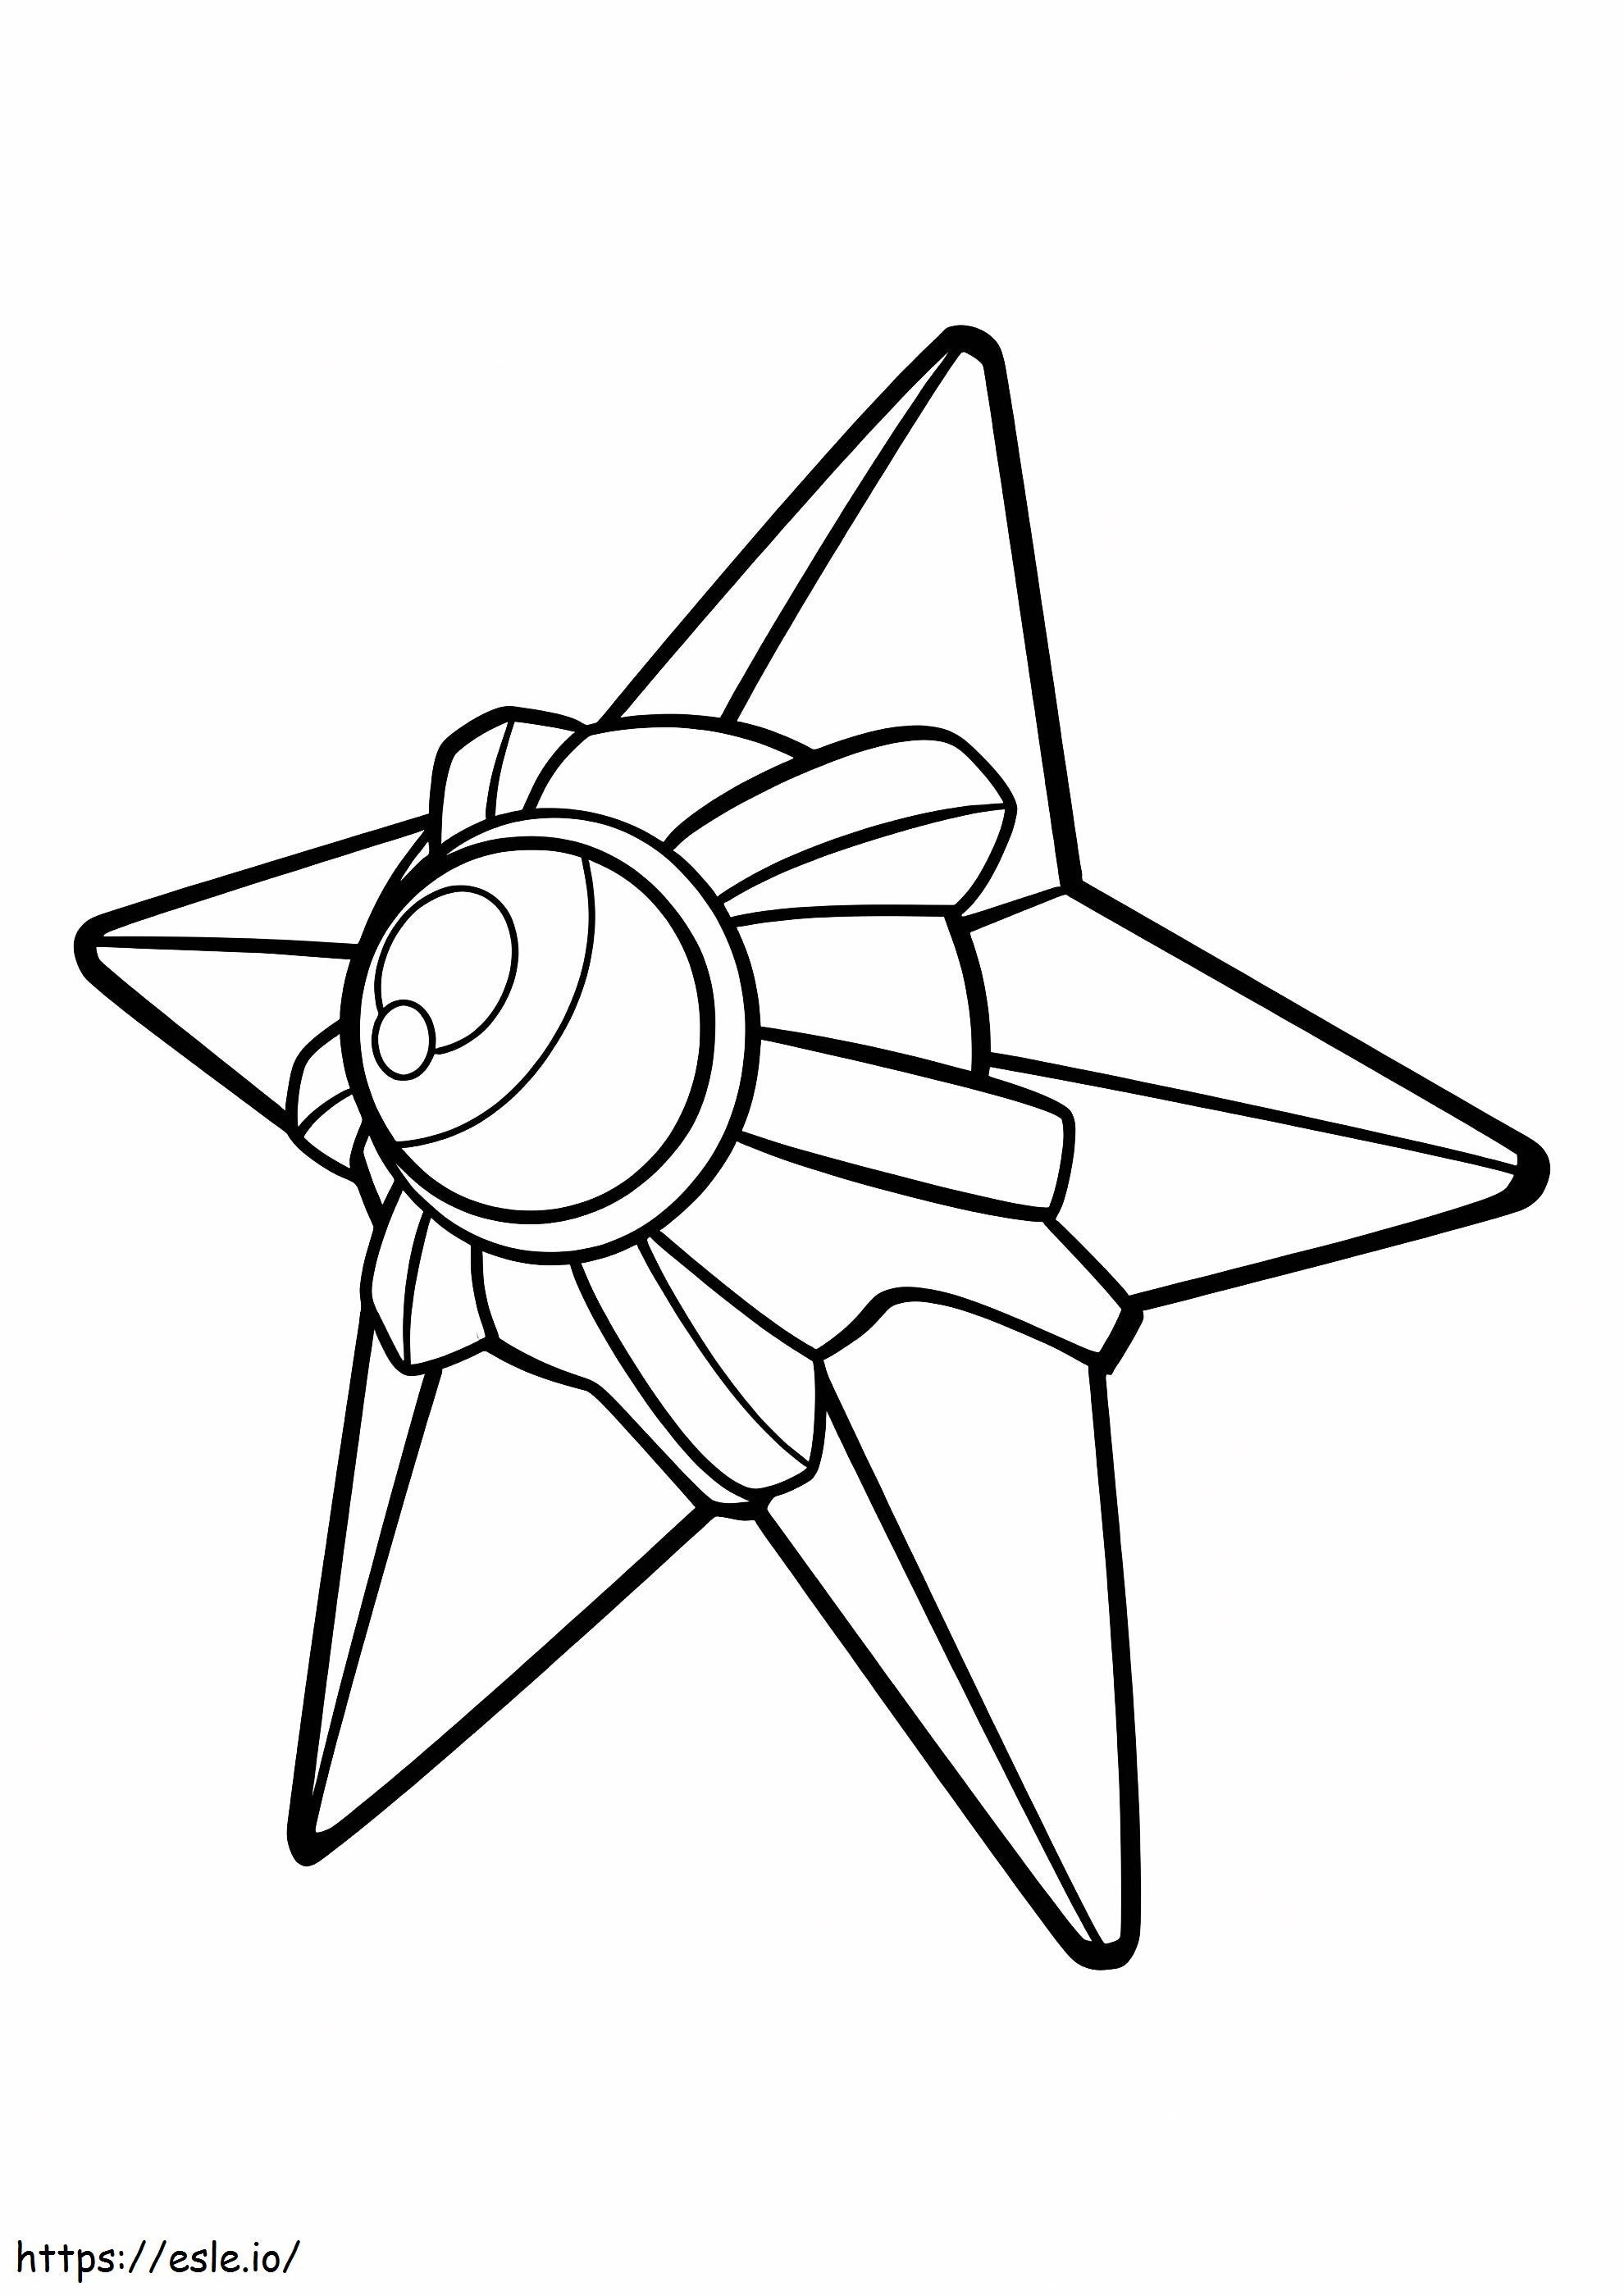 Staryu 1 coloring page